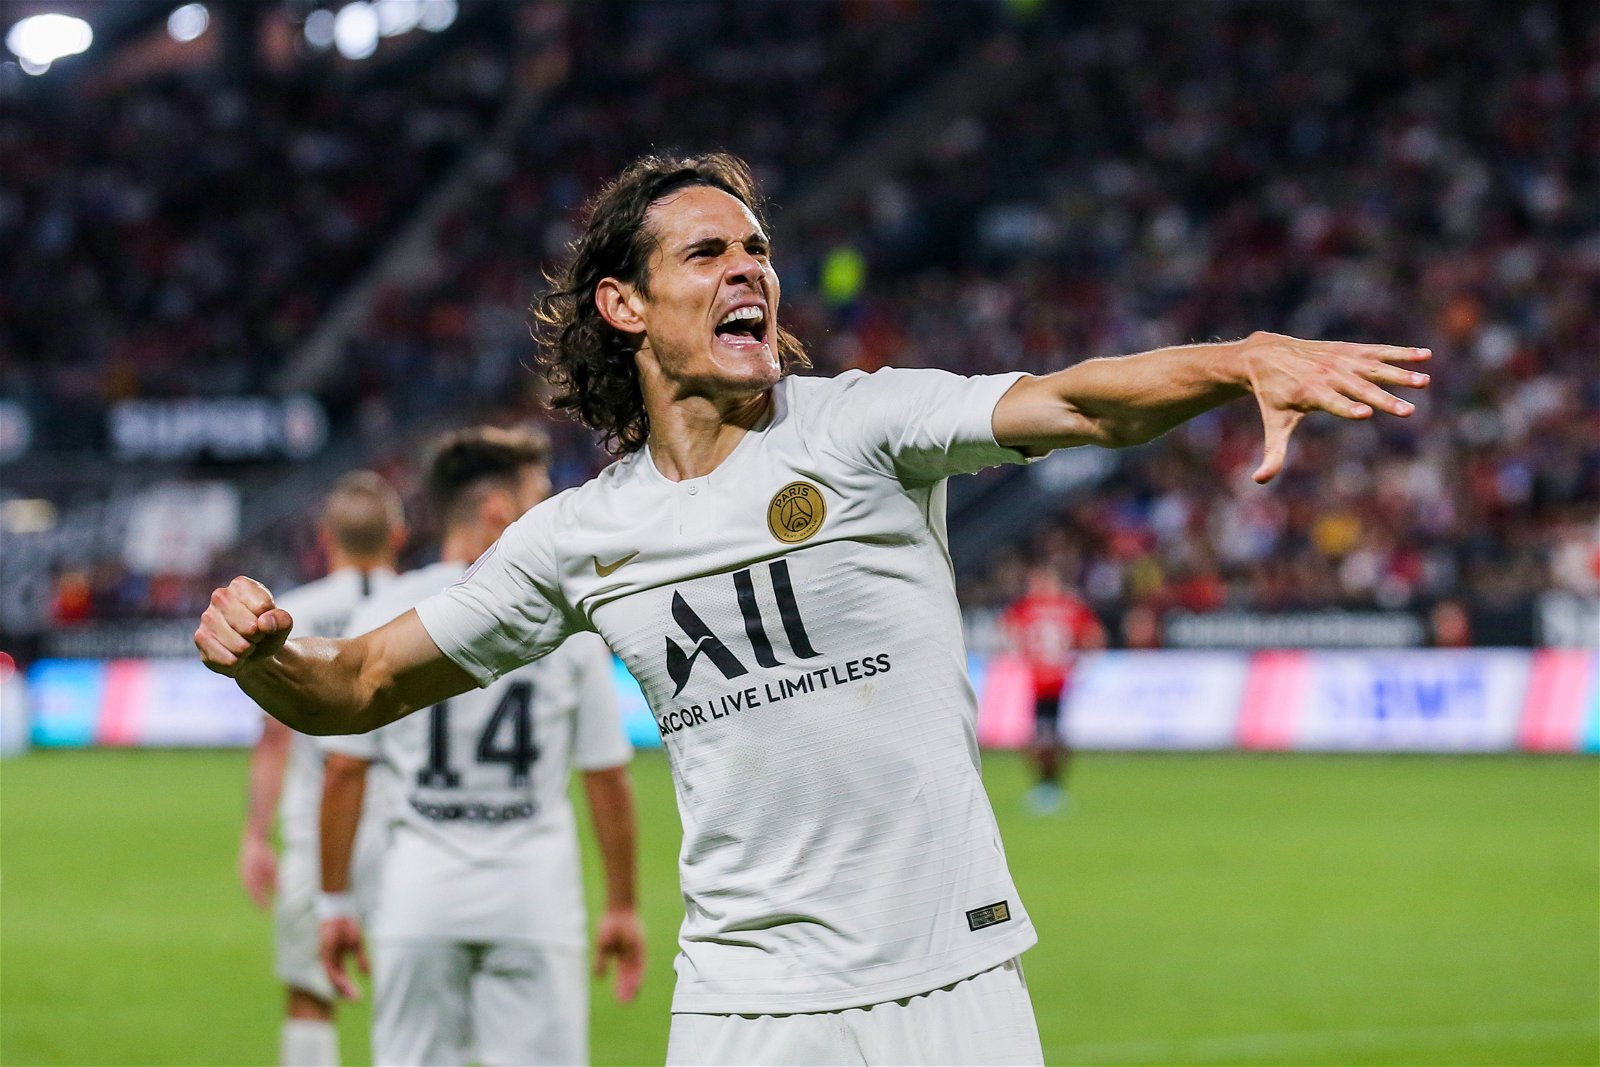 Edinson Cavani could move to Atletico Madrid on free transfer in summer